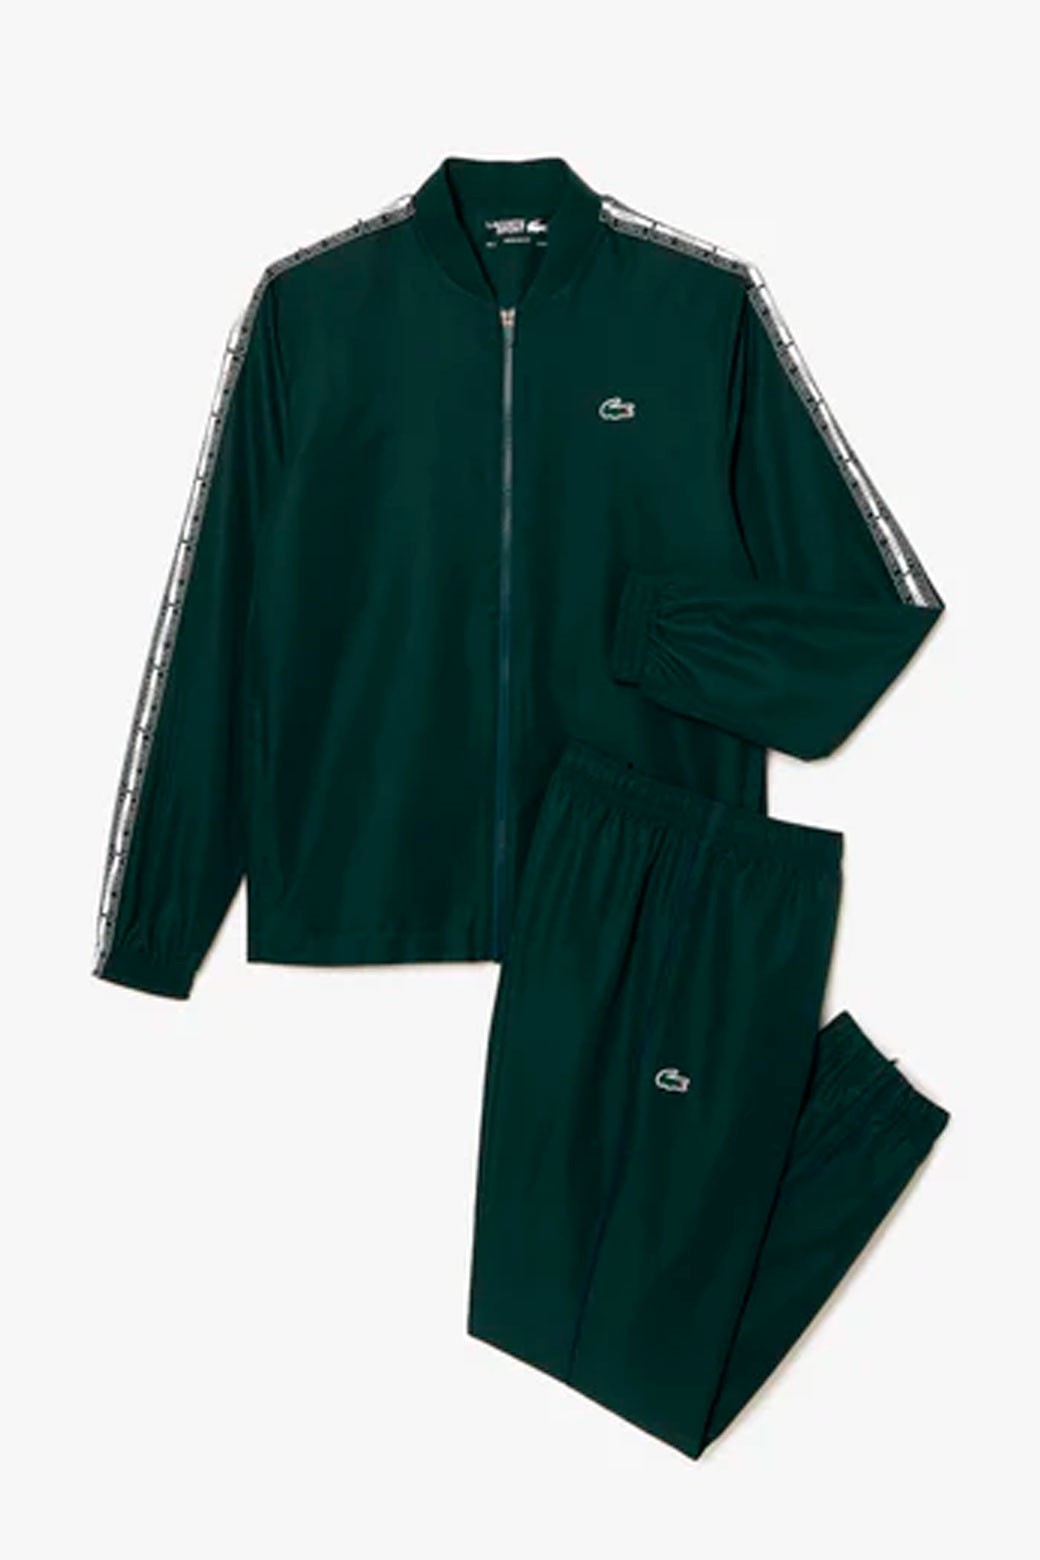 Lacoste Sport TRACKSUIT - Chándal - sinople/verde oscuro 